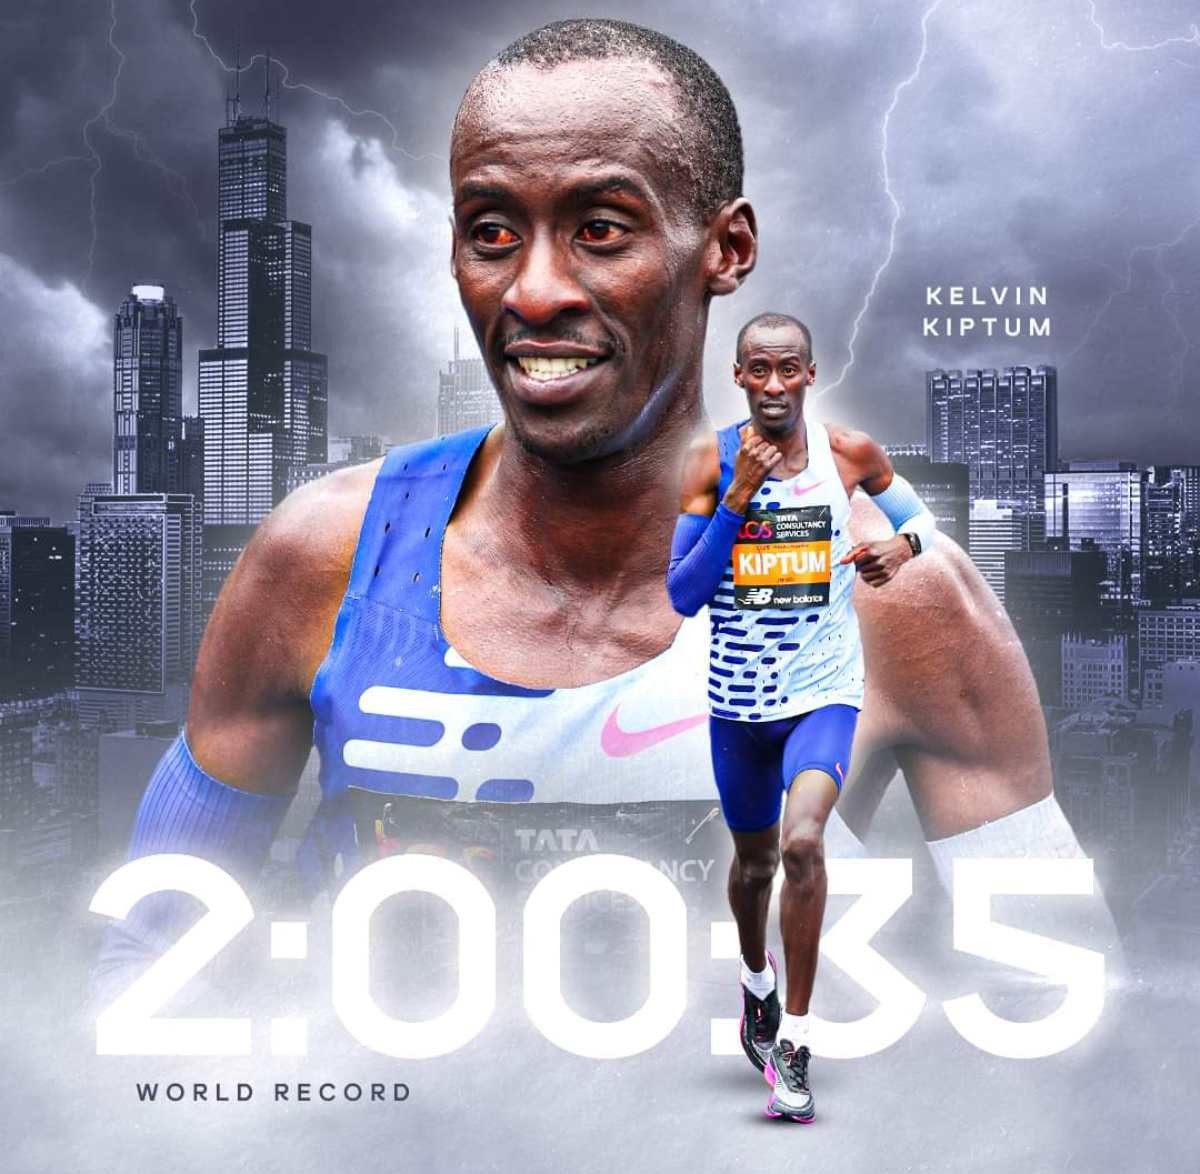 Kelvin Kiptum breaks the world record at the Chicago Marathon and brings Nike back into the limelight